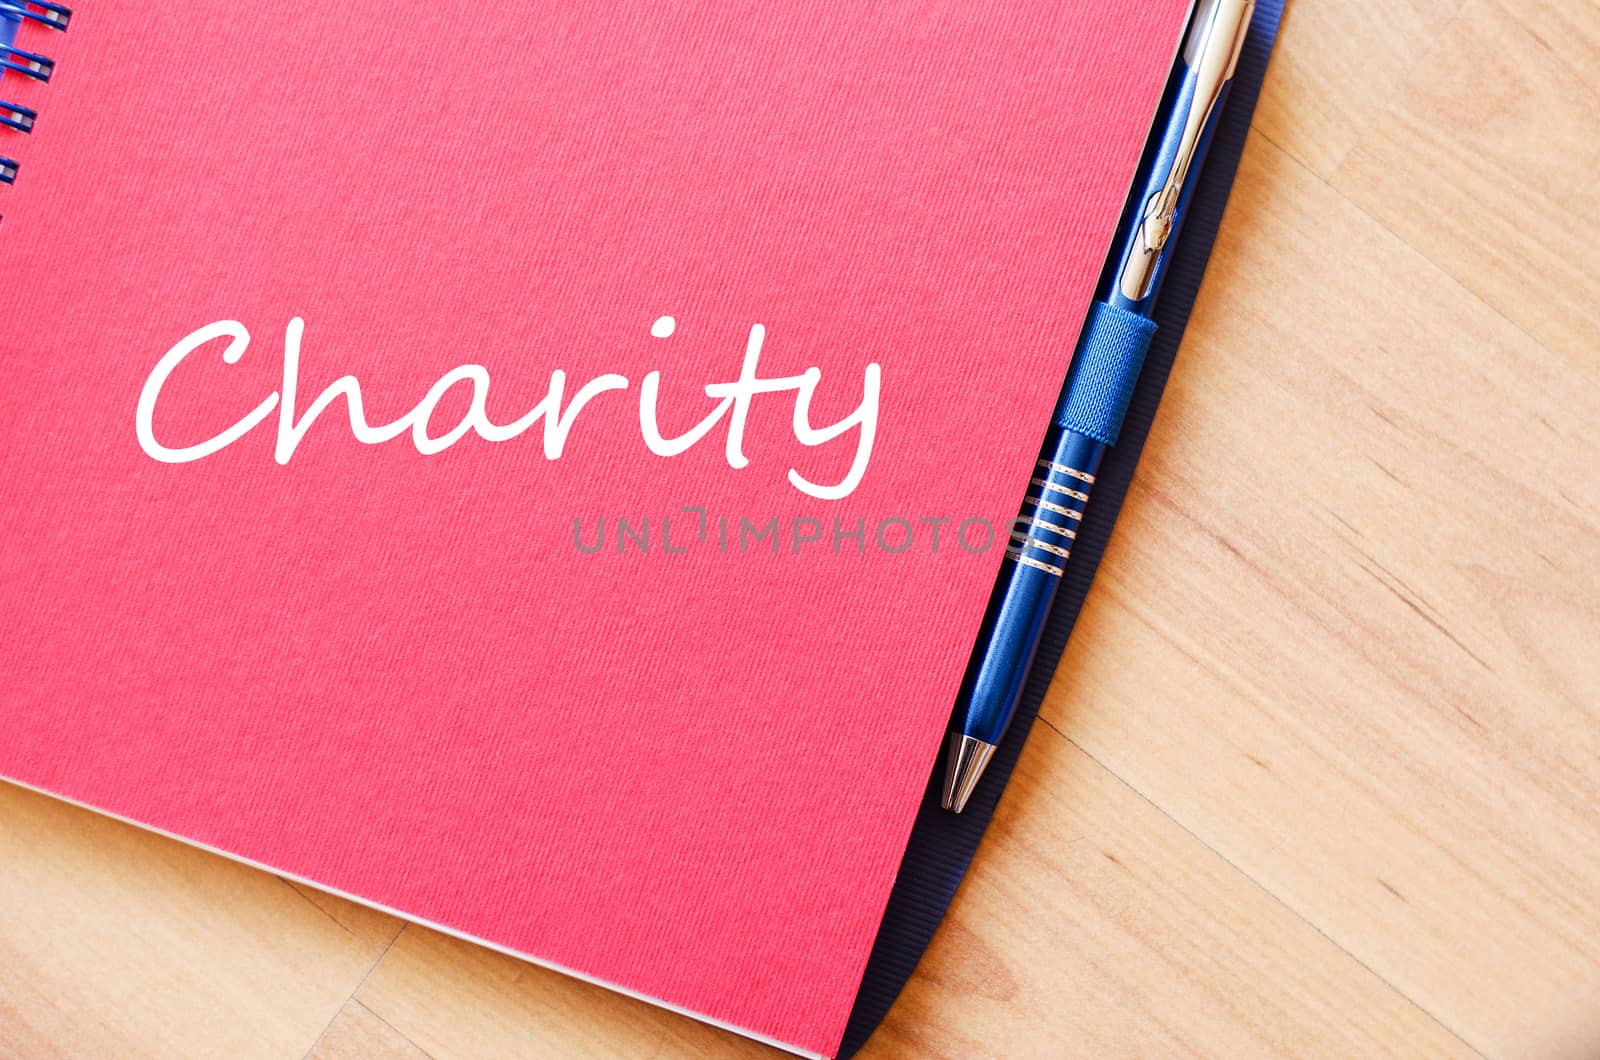 Charity text concept write on notebook